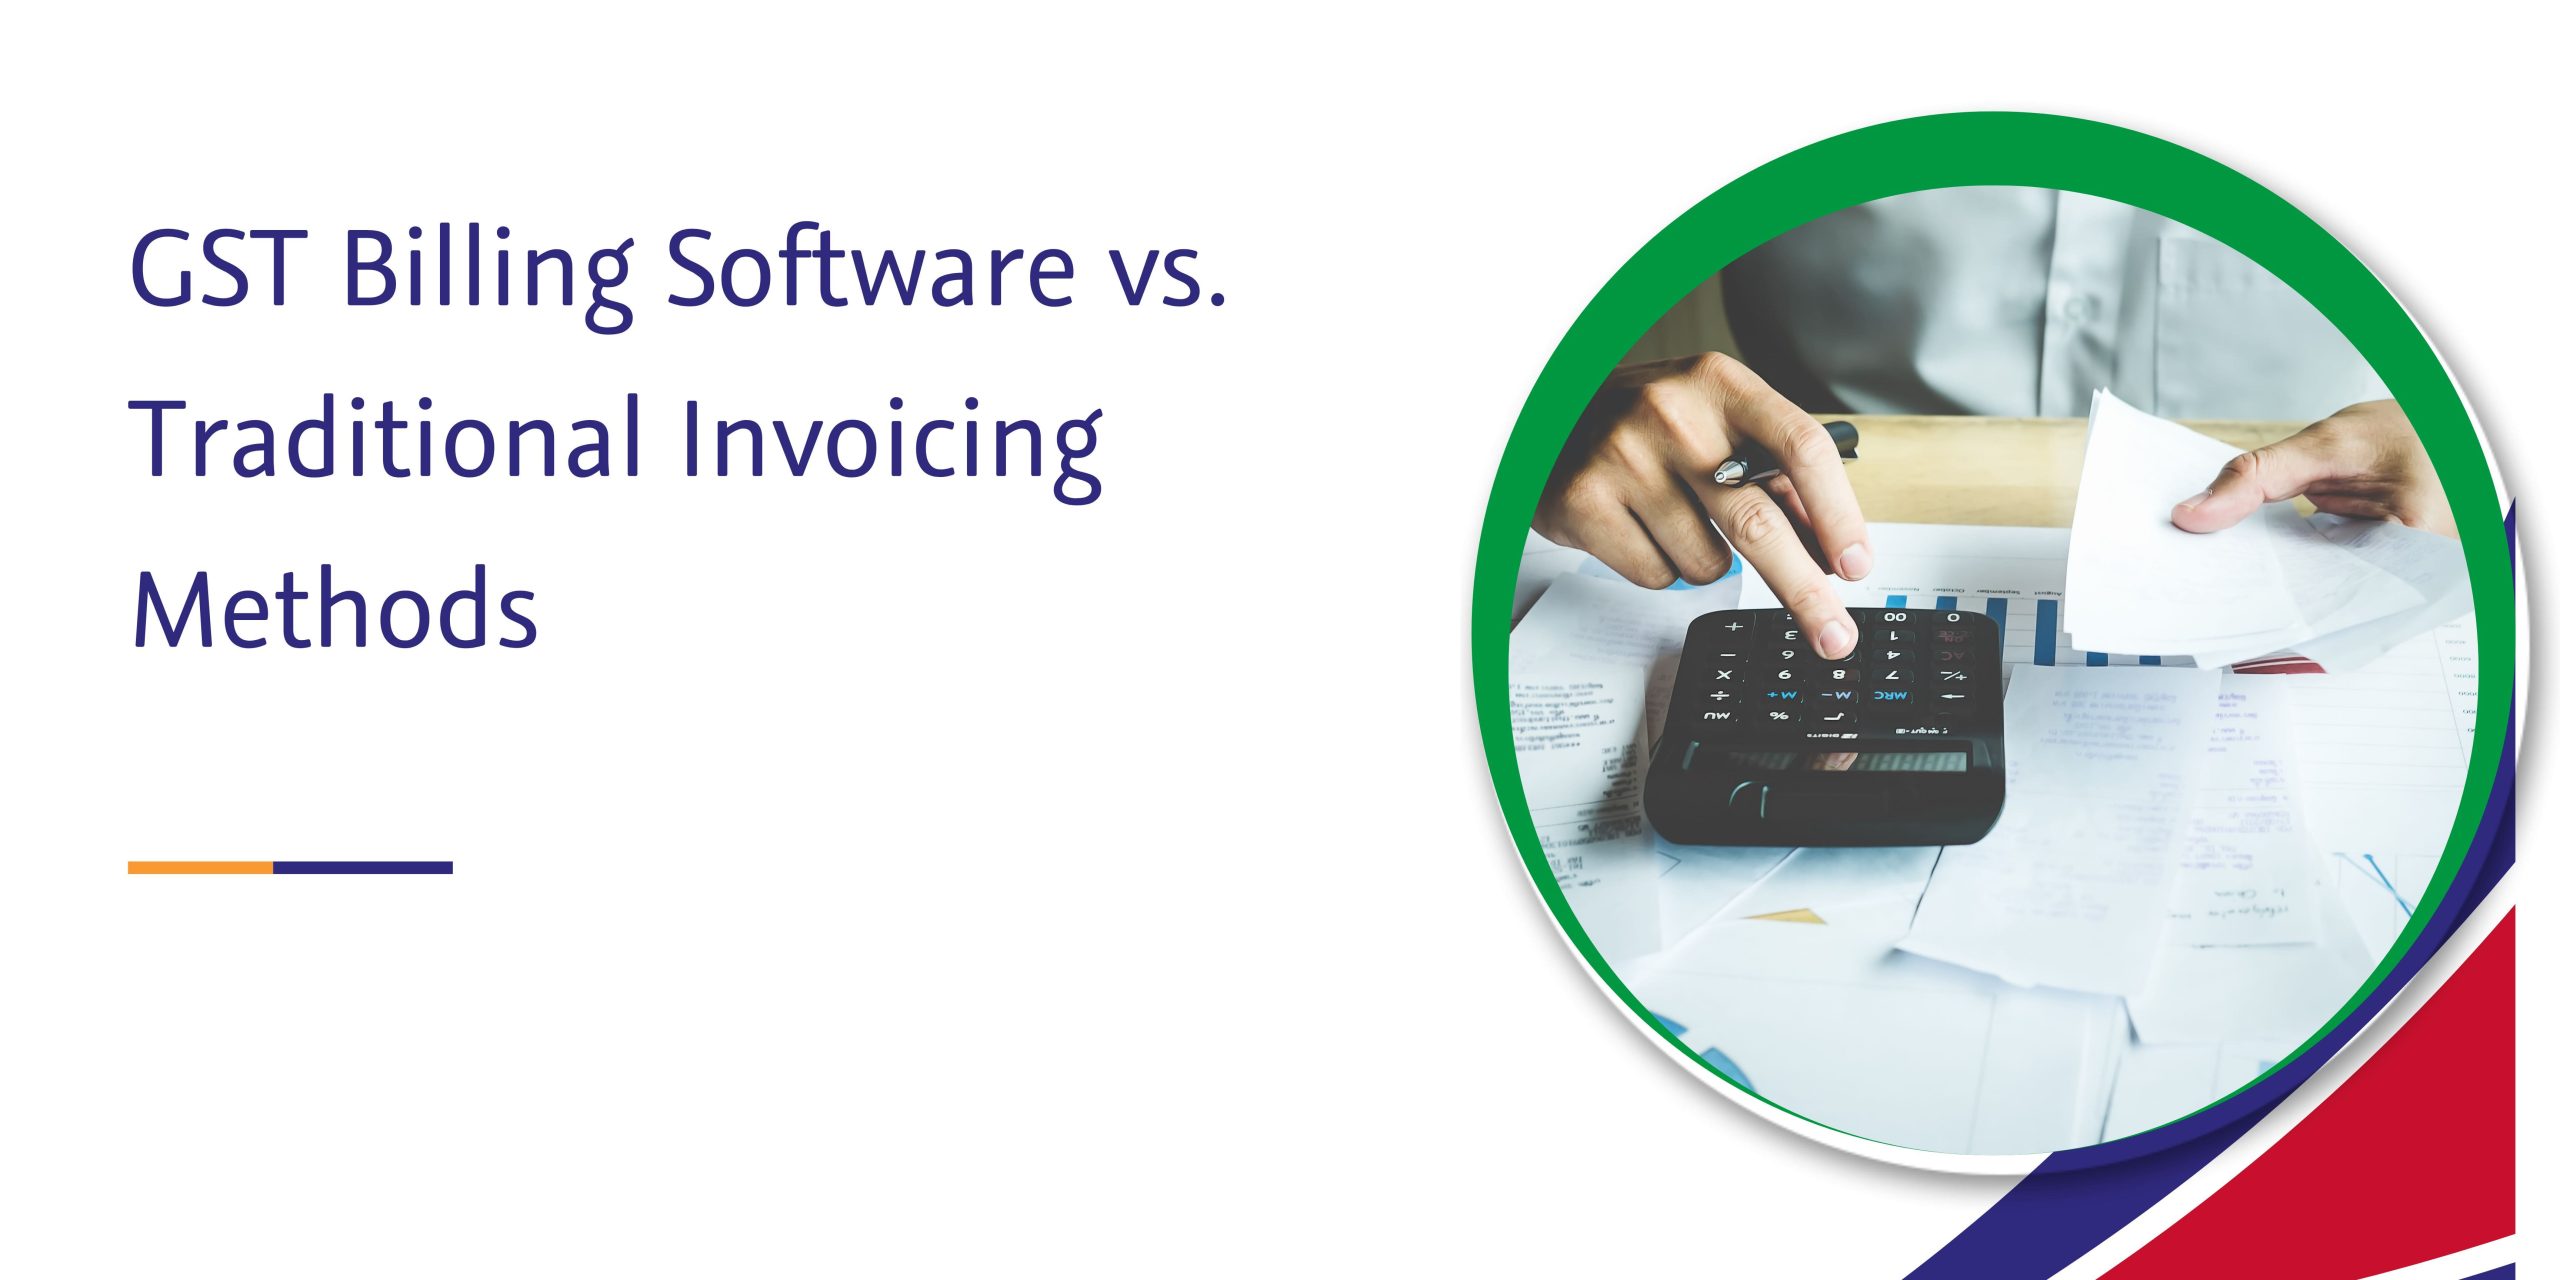 gst billing software vs traditional invoicing methods